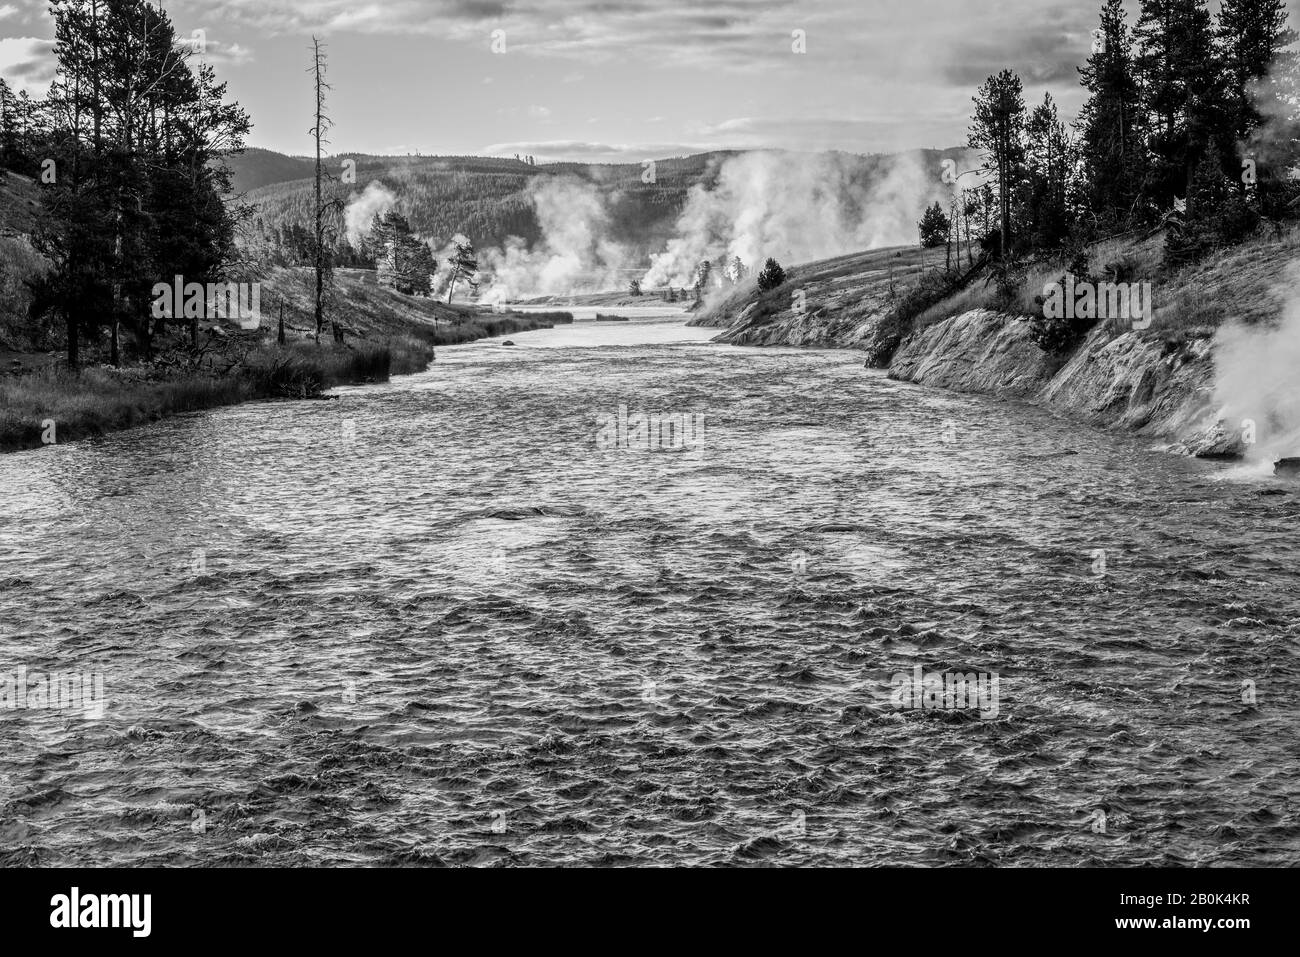 Fast moving river flowing towards geysers venting steam and forested hills. Stock Photo